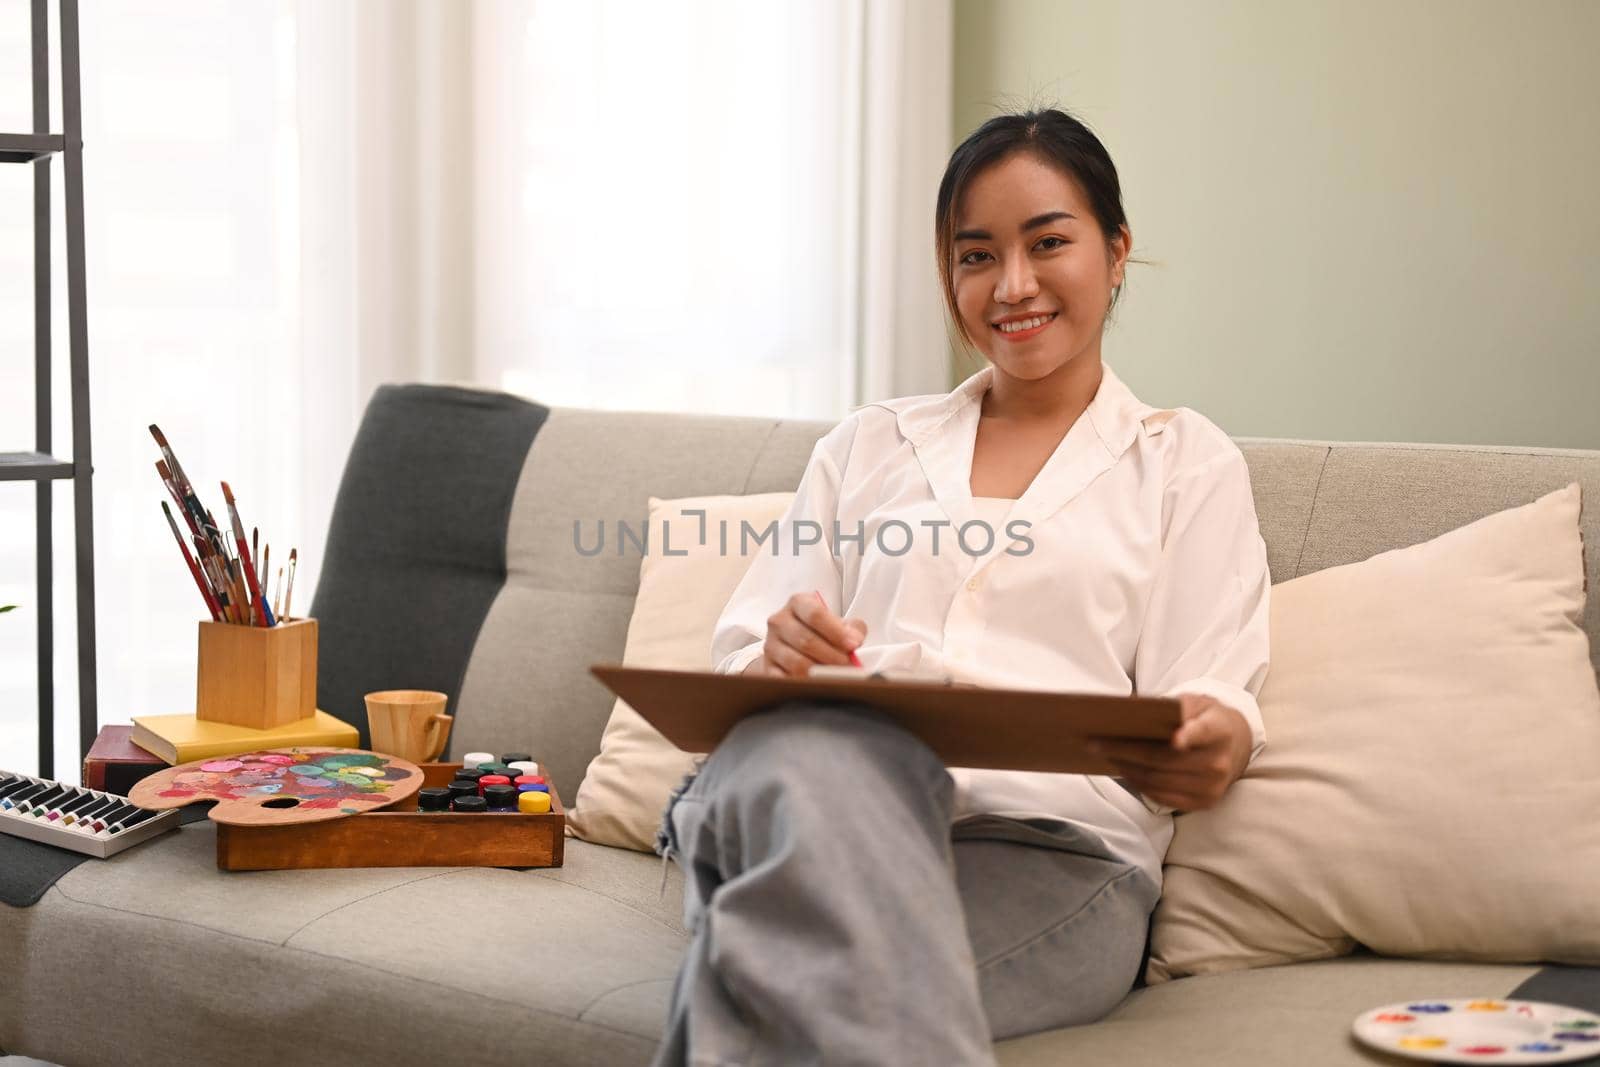 Smiling creative woman painting with watercolor in bright cozy living room. Art, creative hobby and leisure activity concept.